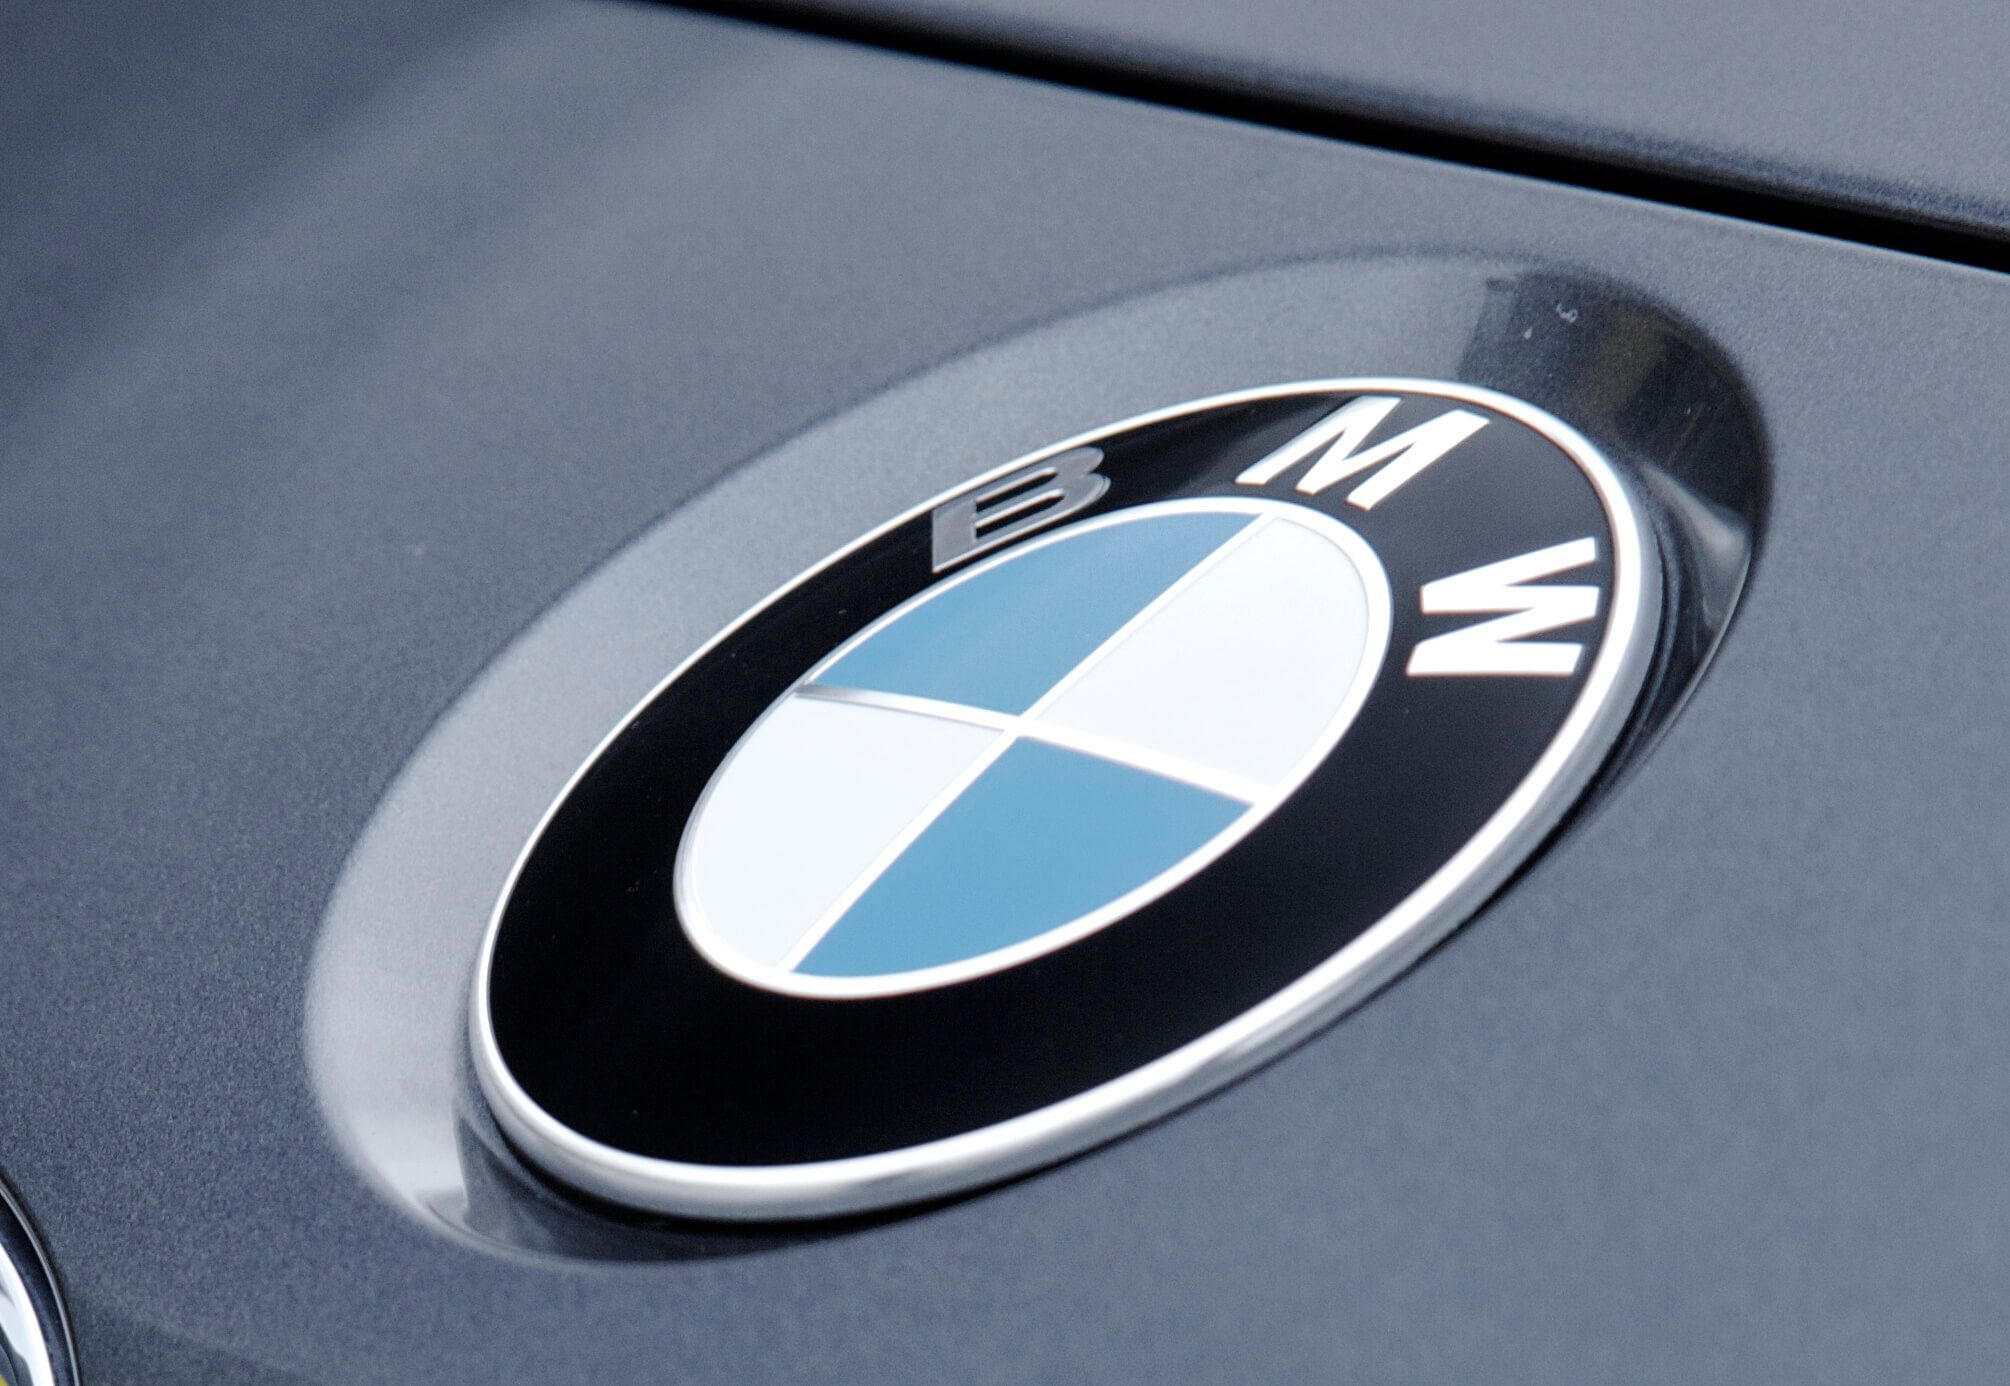 All about the BMW Logo: History, Meaning and More